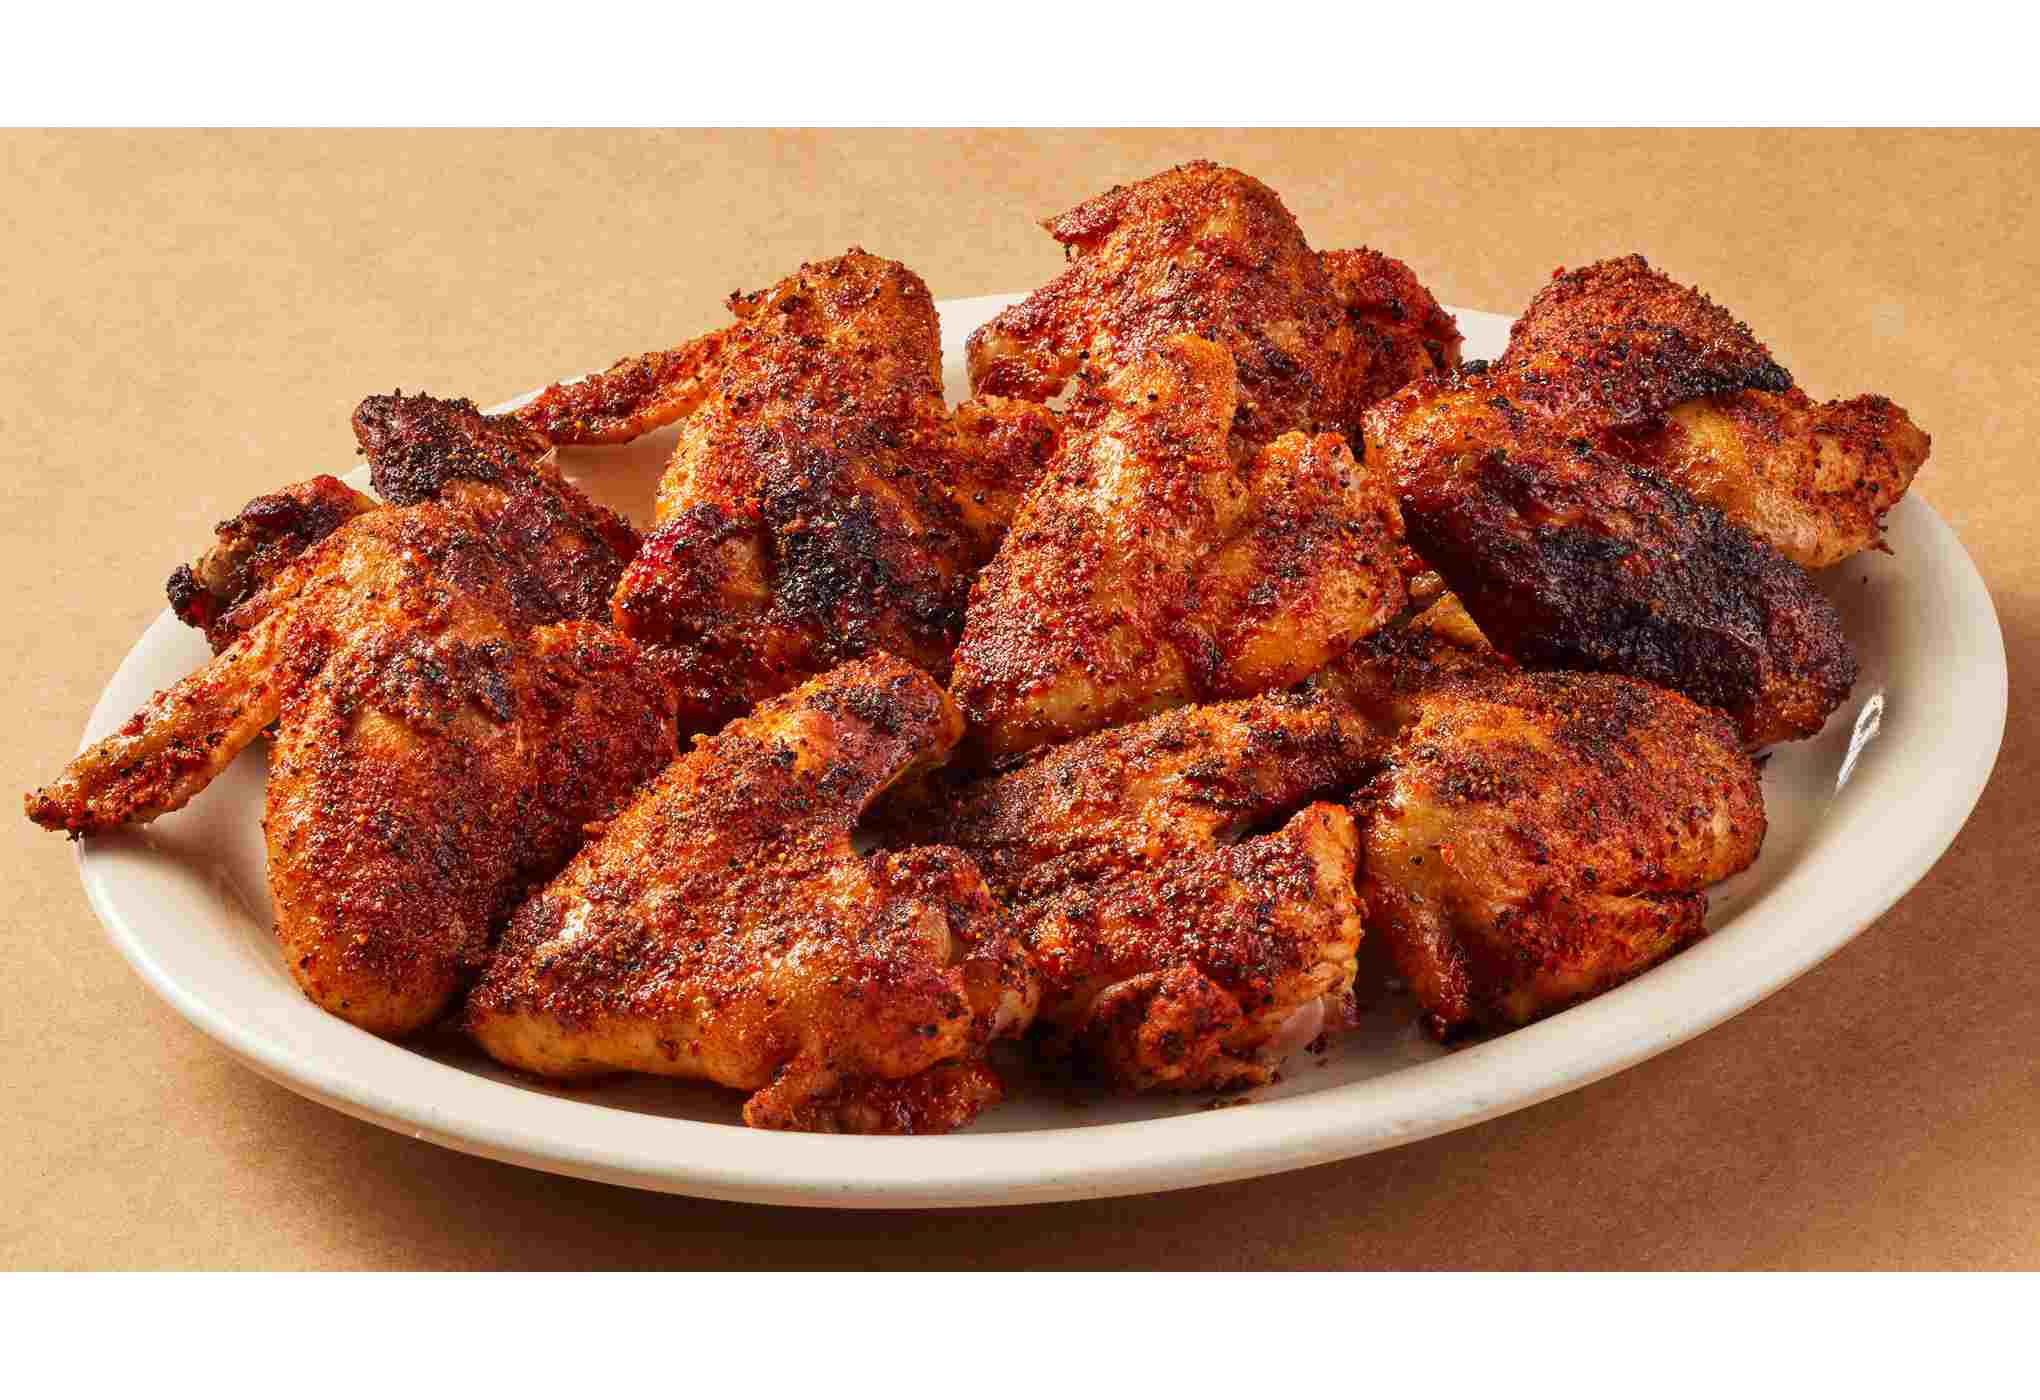 H-E-B Meat Market Seasoned Whole Chicken Wings - Texas Style BBQ - Texas-Size Pack; image 2 of 3